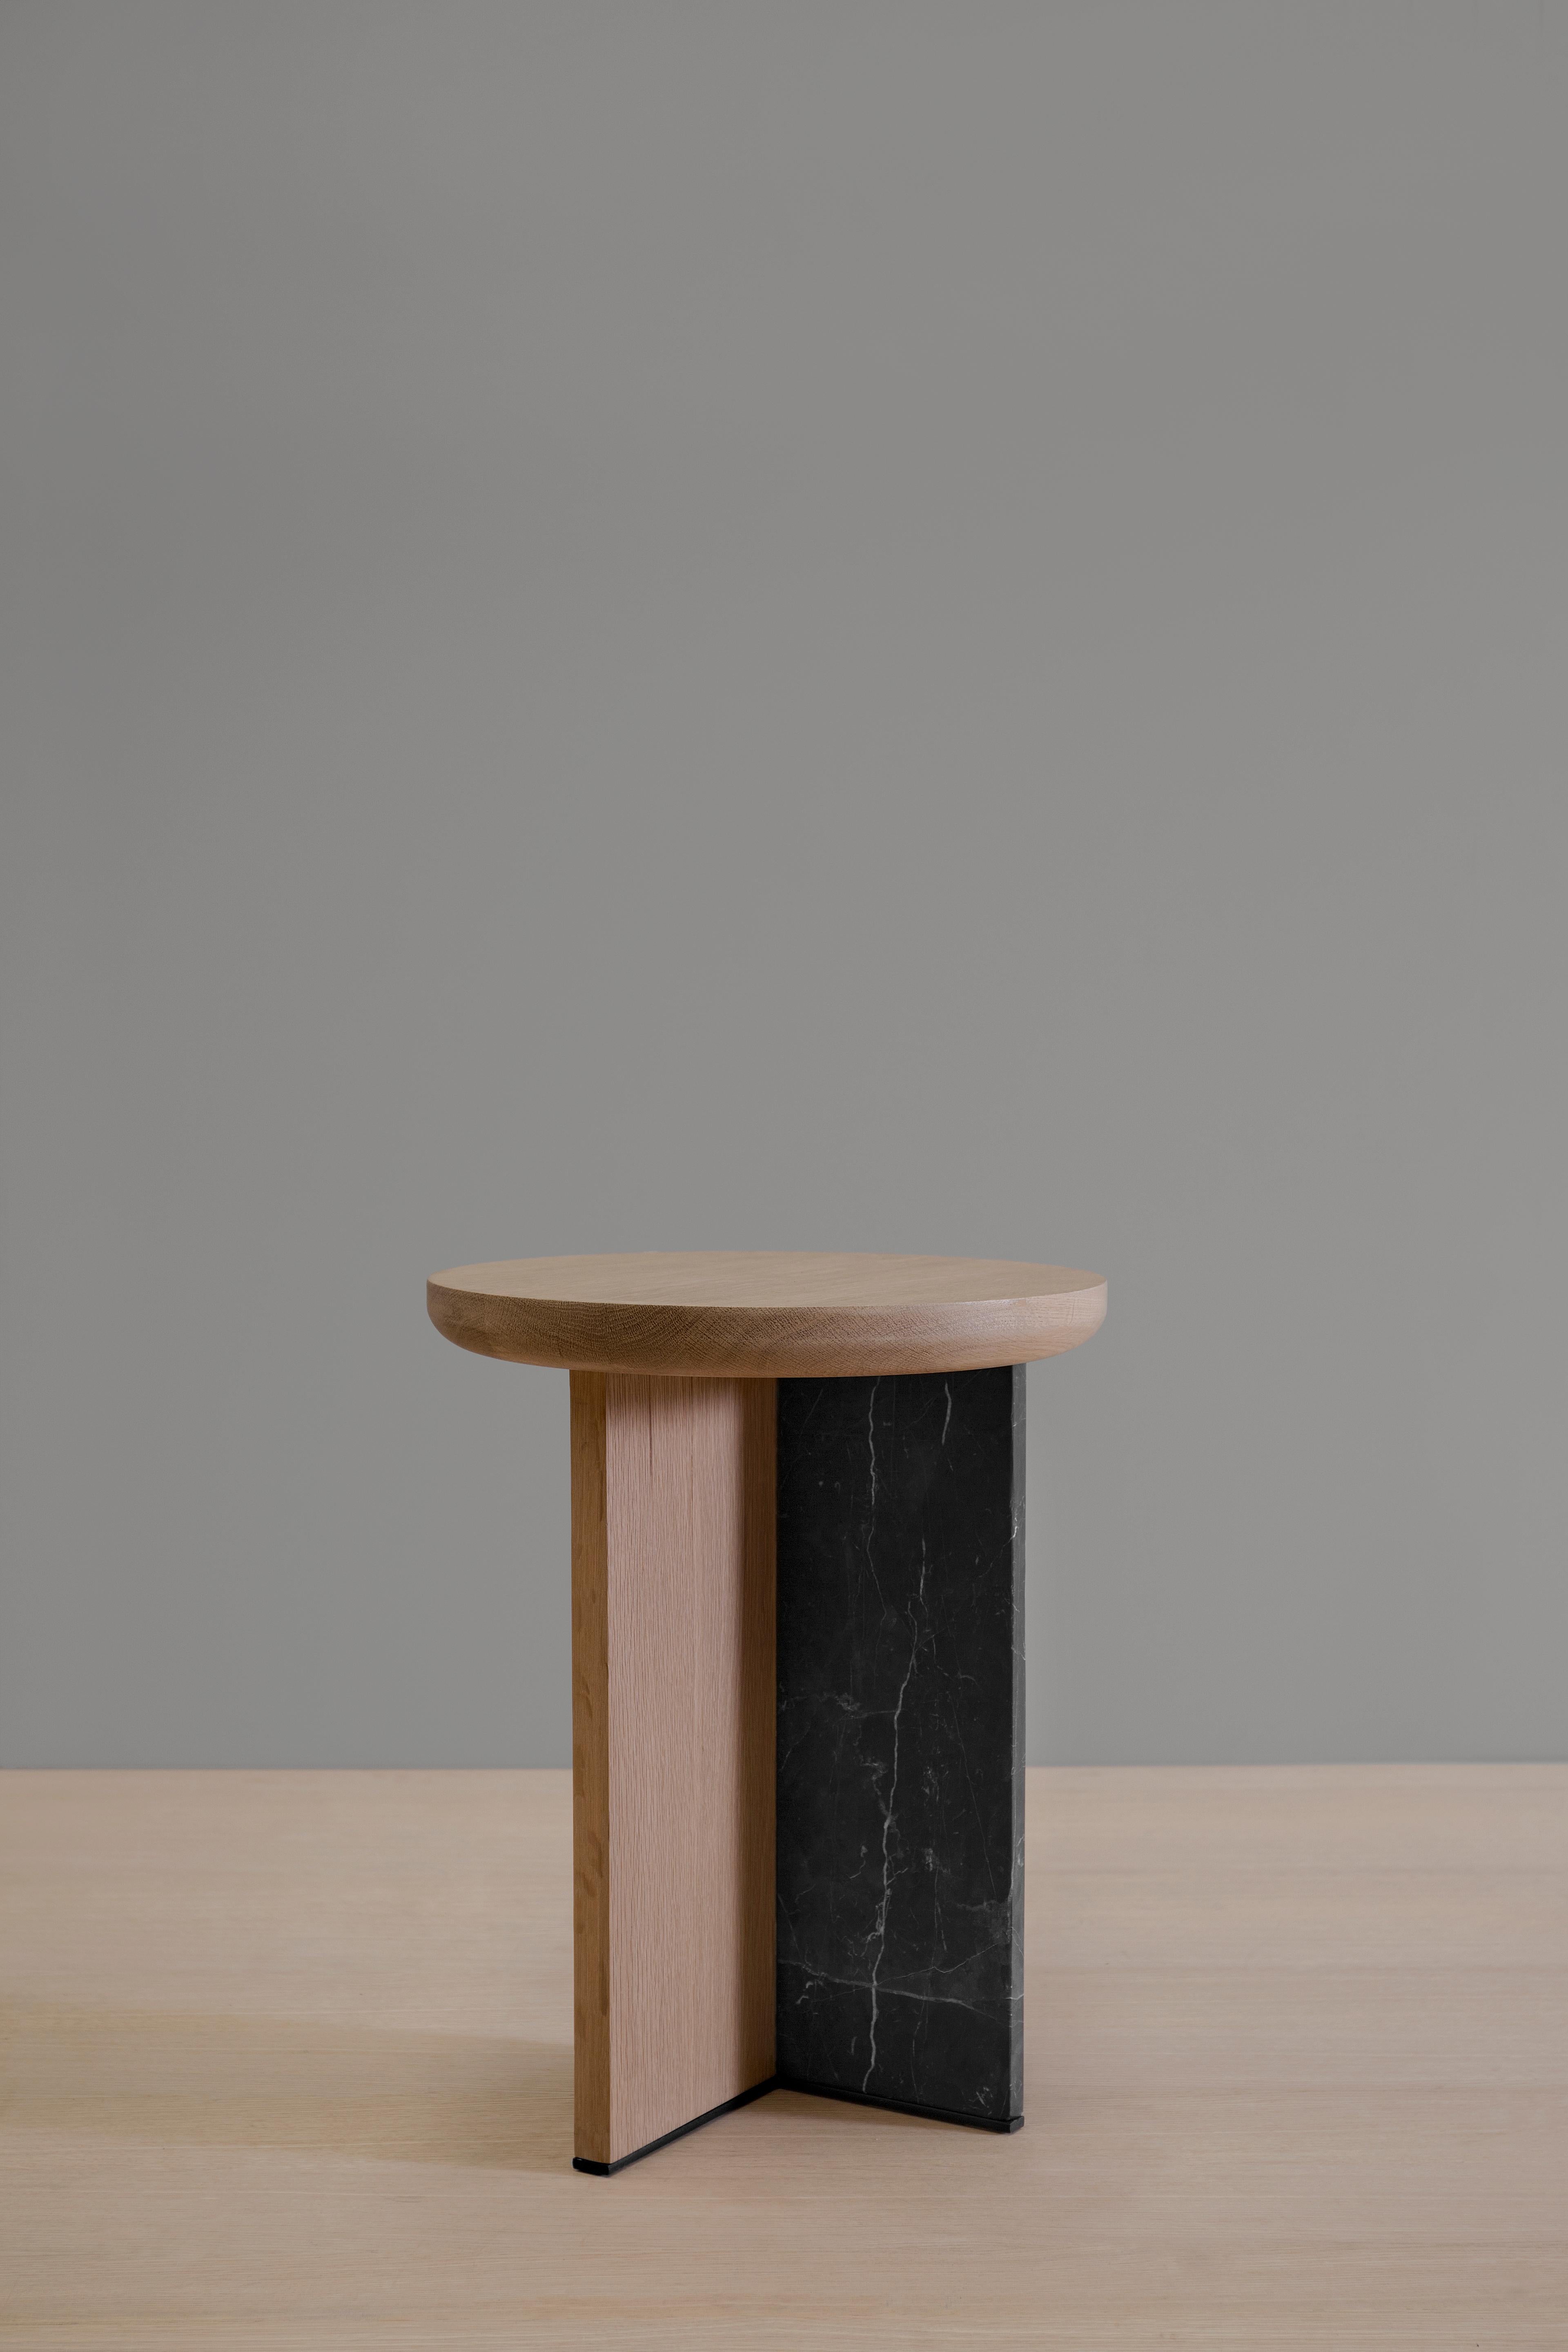 Antropología 04 is an oak and marble stool and side table designed by Raul de la Cerda for BREUER ESTUDIO. This pies is part of Antropología Collection in which Raul collaborated with BREUER to create exceptional pieces. 

Raul de la Cerda is an